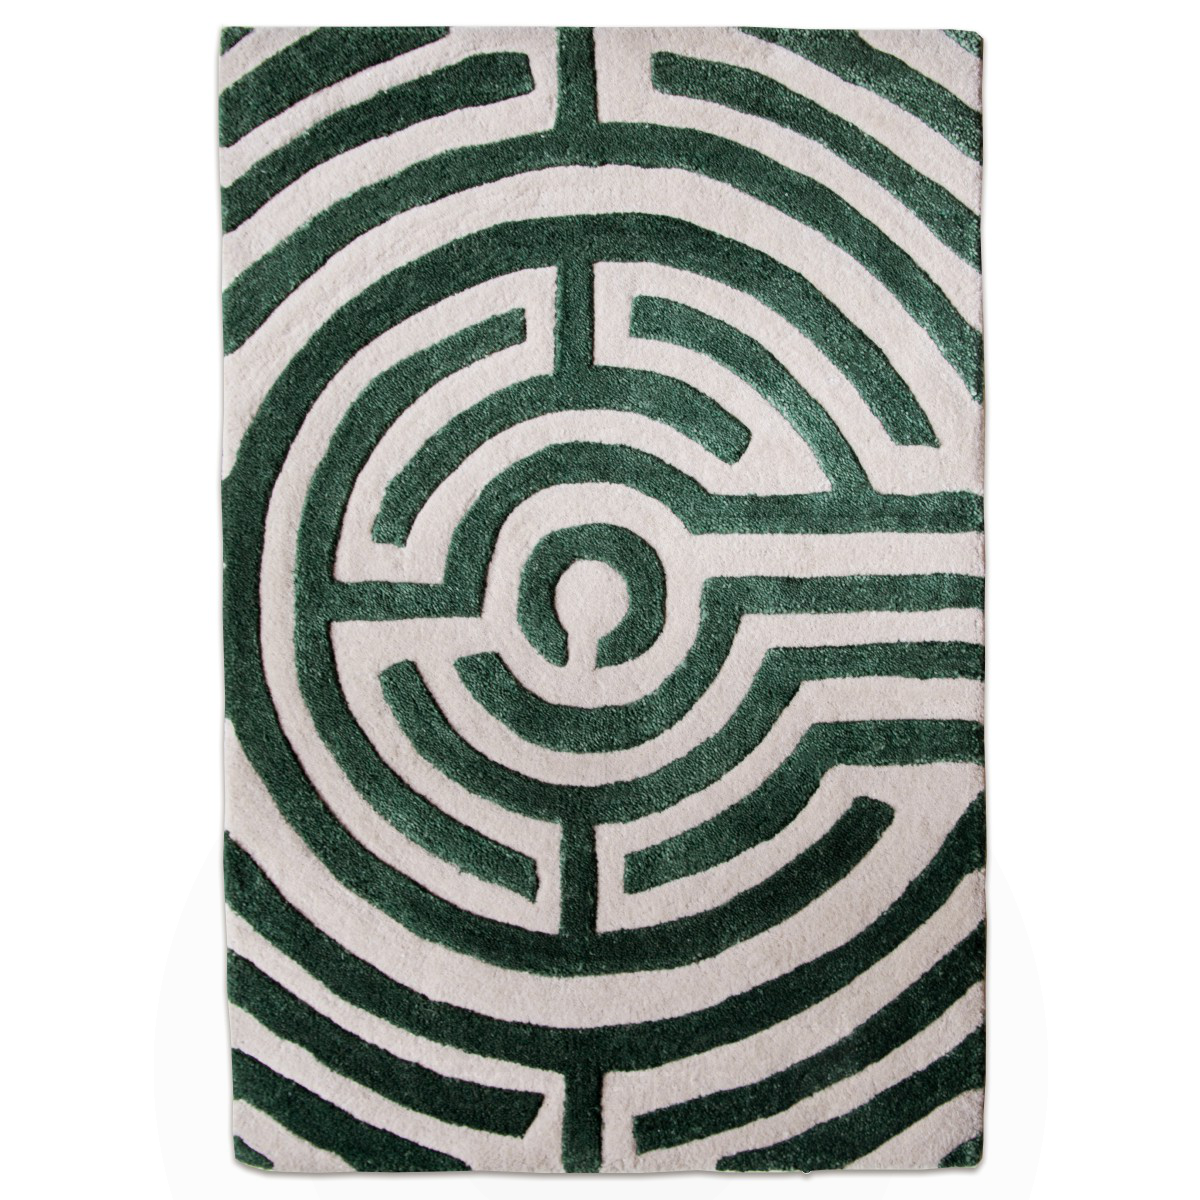 Labyrinth Collection Area Rugs: A Luxurious Interpretation of Historic Mazes